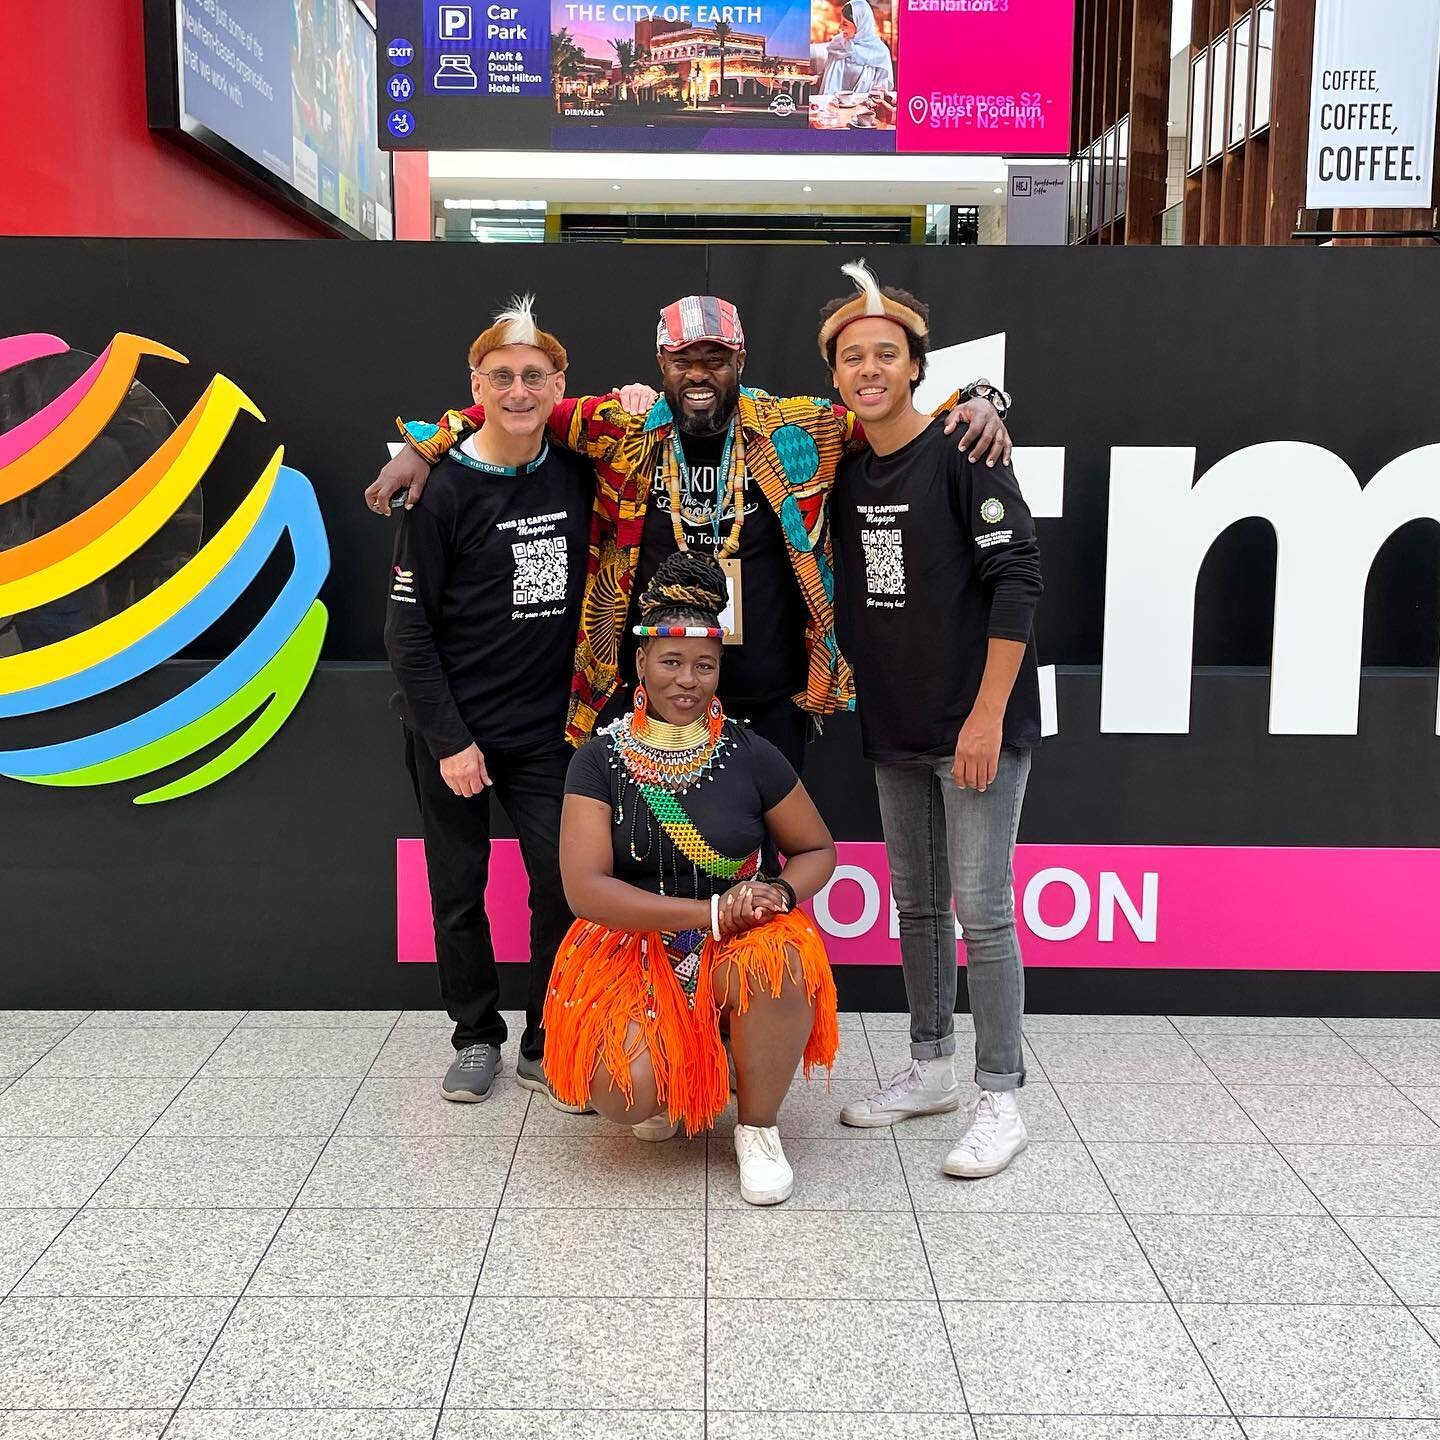 Great start to the week performing at World Travel Market this morning for the wonderful @thisis.capetownza - many thanks for having us! Download a free copy of their magazine via their page. 

#wtm #wtmldn #wtmlondon #worldtravelmarket